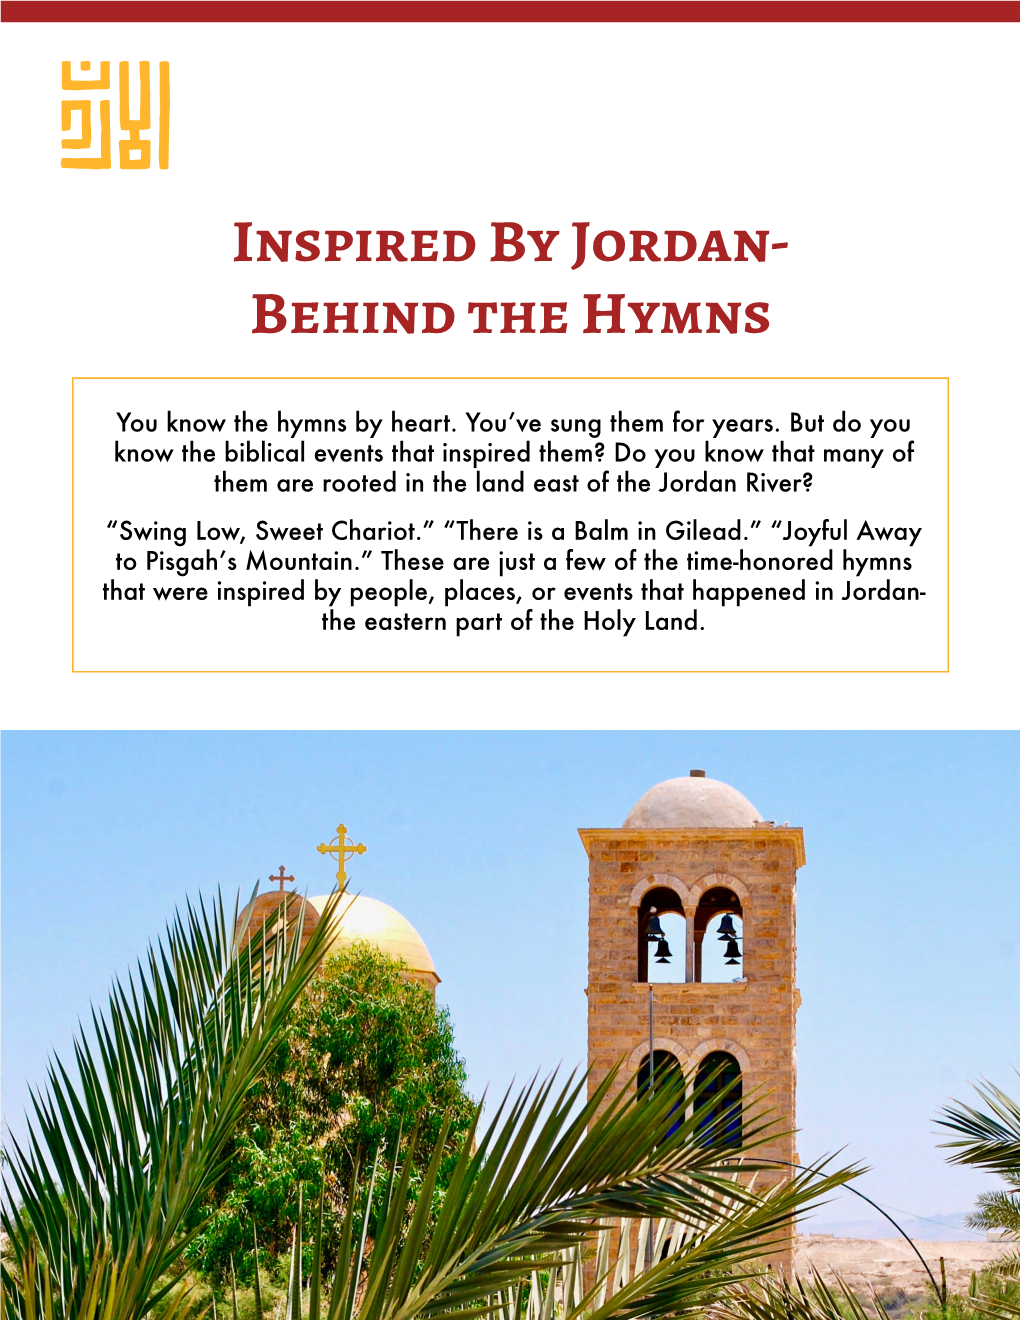 Inspired by Jordan- Behind the Hymns